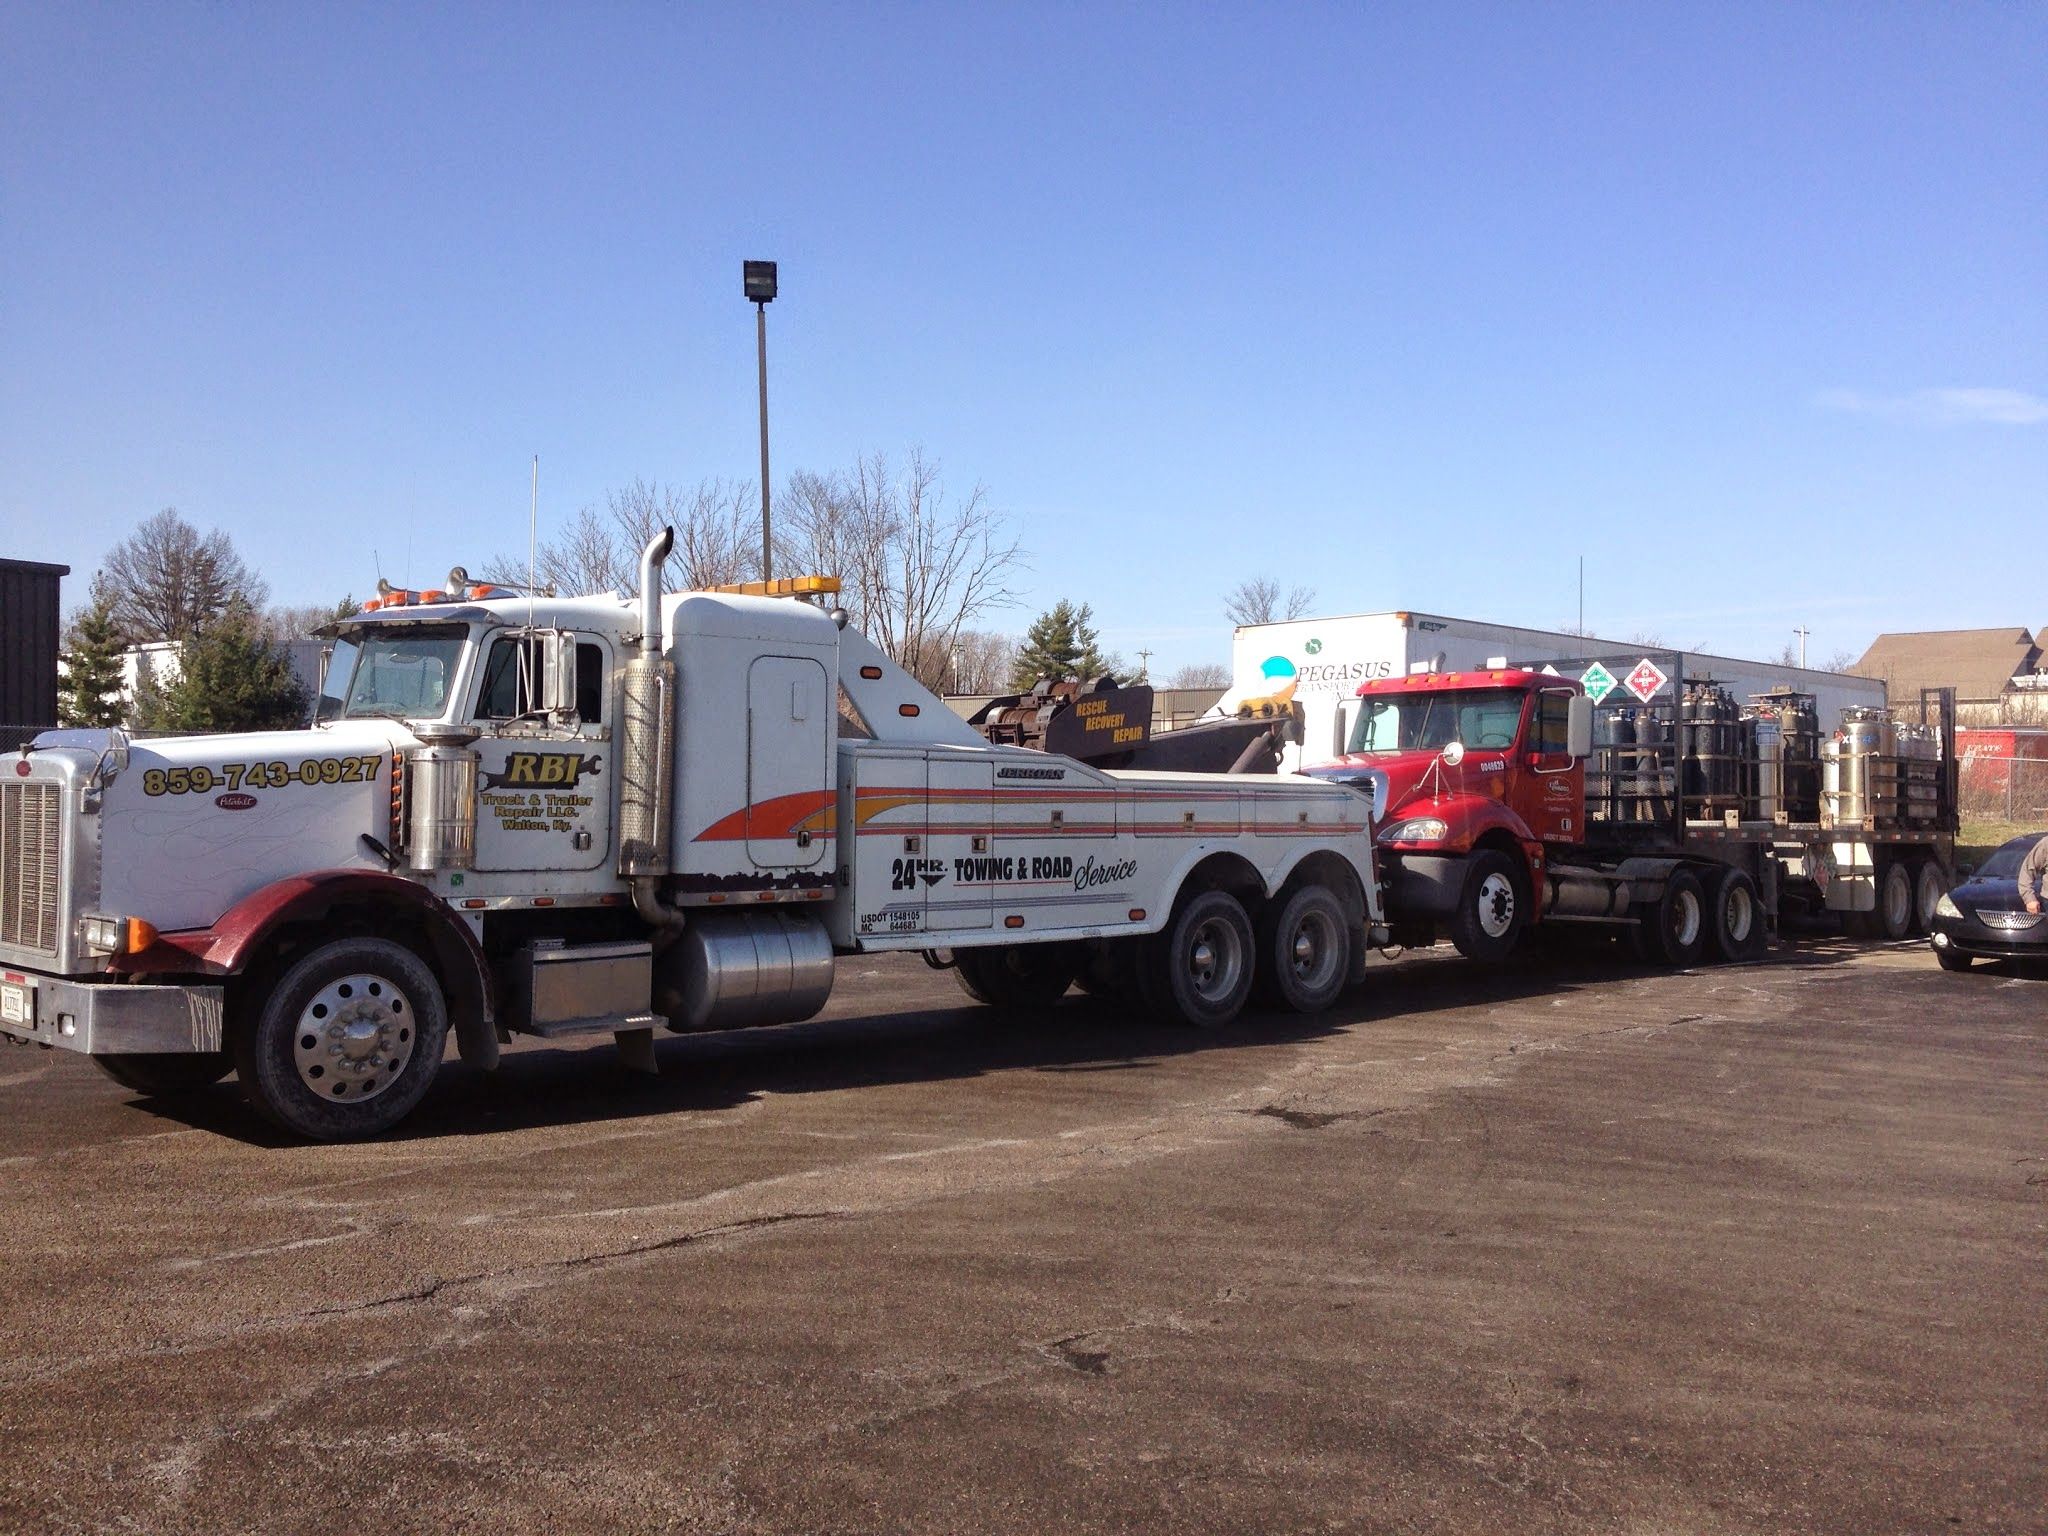 Services & Products Rbi Truck & Trailer Repair in Verona KY